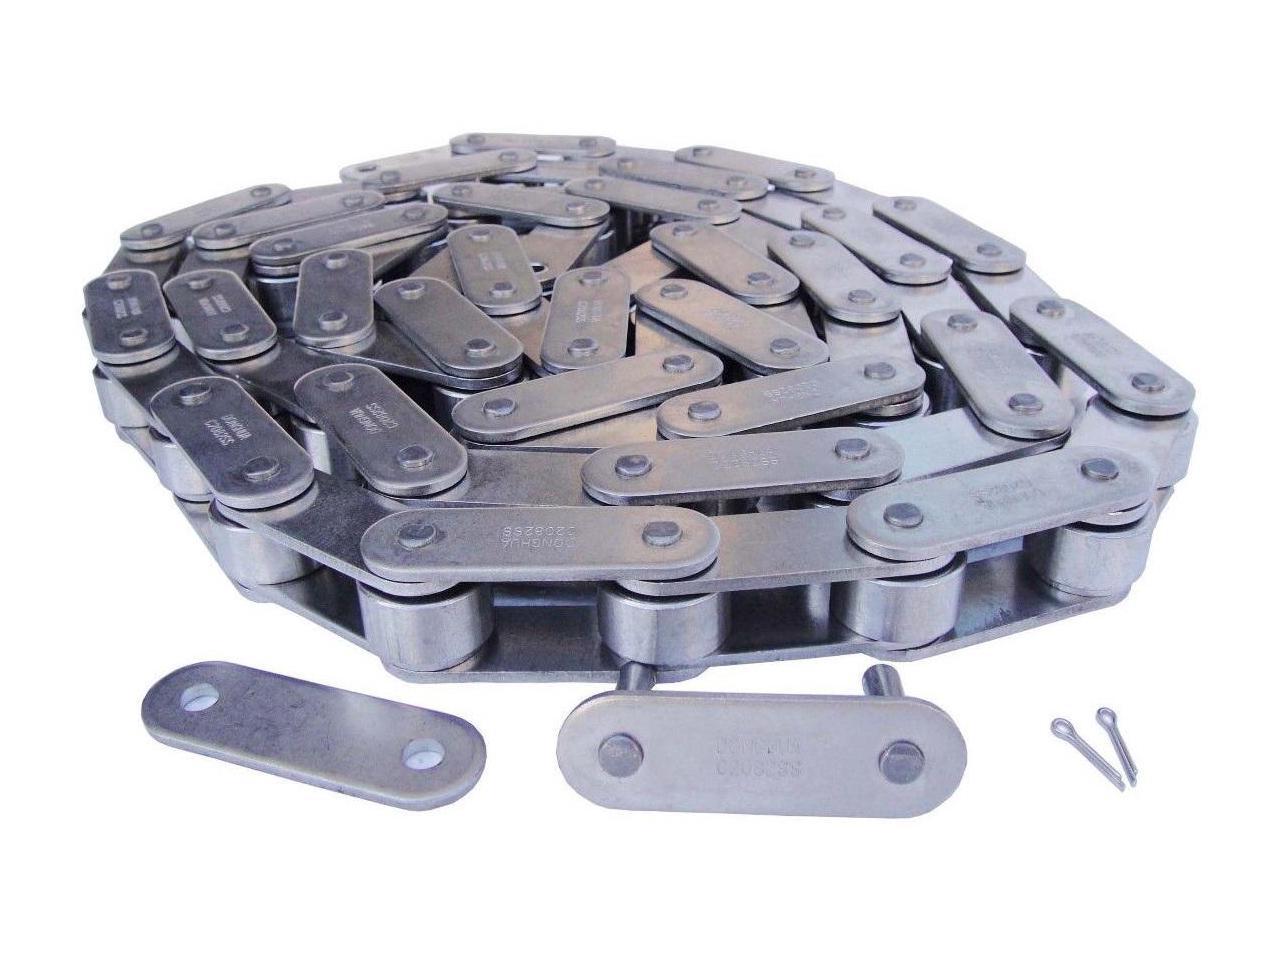 Jeremywell BL523 Leaf Chain 10 Feet for Forklift Masts,Hoisting with 1 Connecting Link 